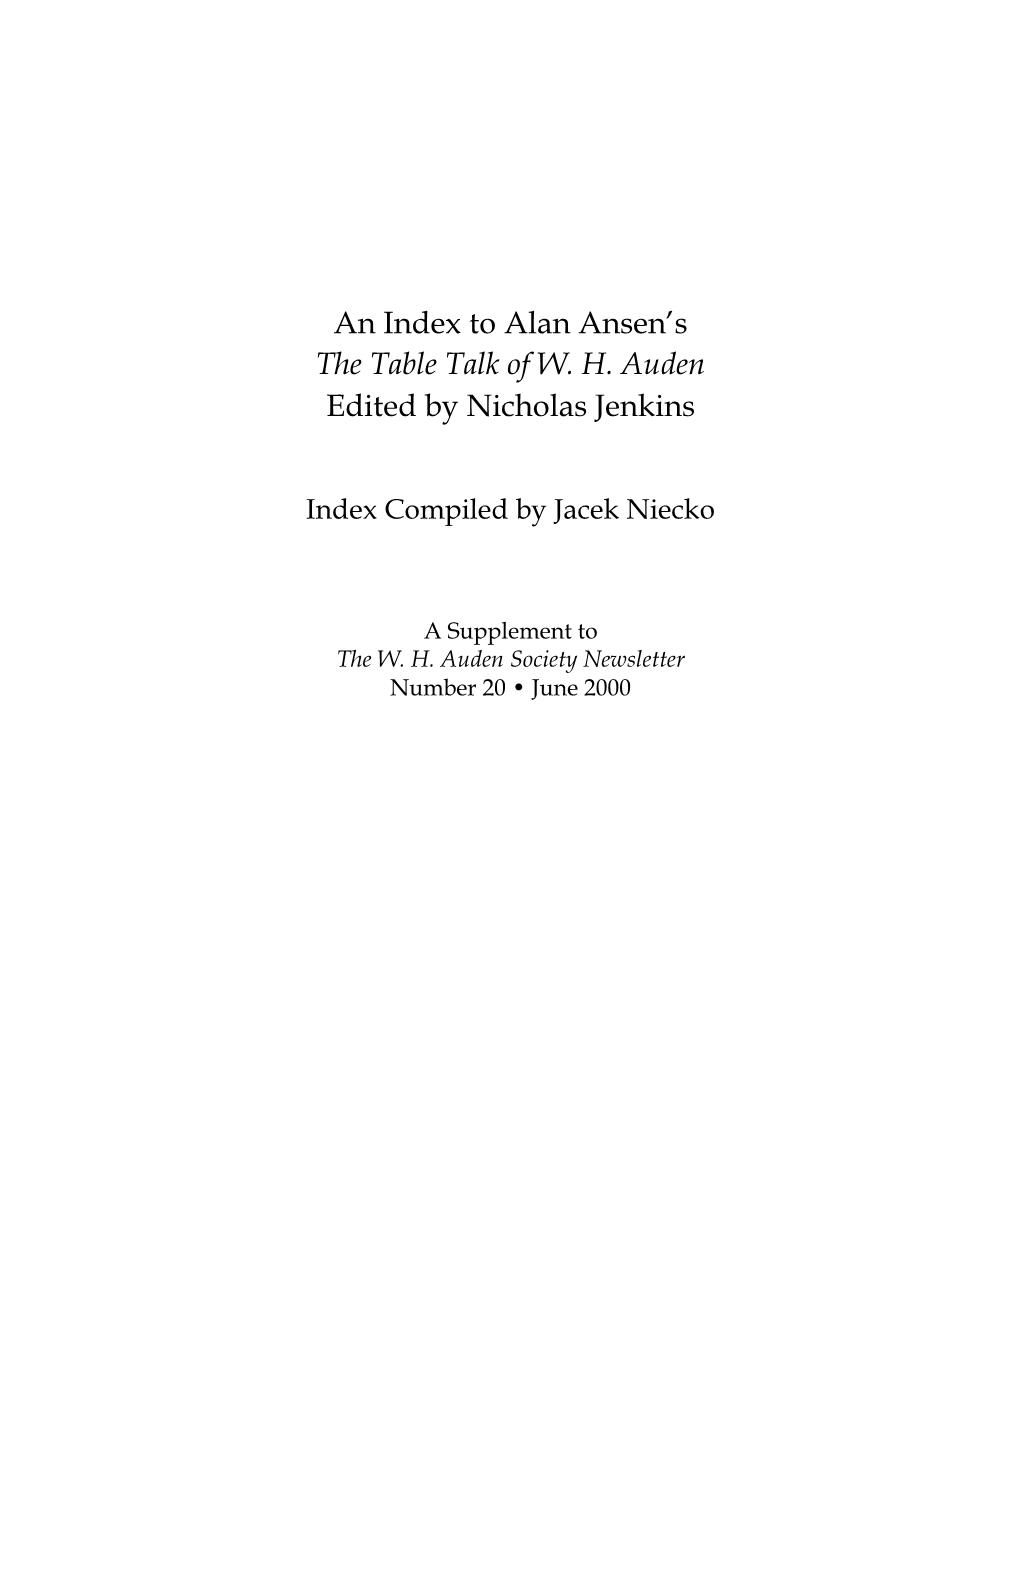 An Index to Alan Ansen's the Table Talk of W. H. Auden Edited By